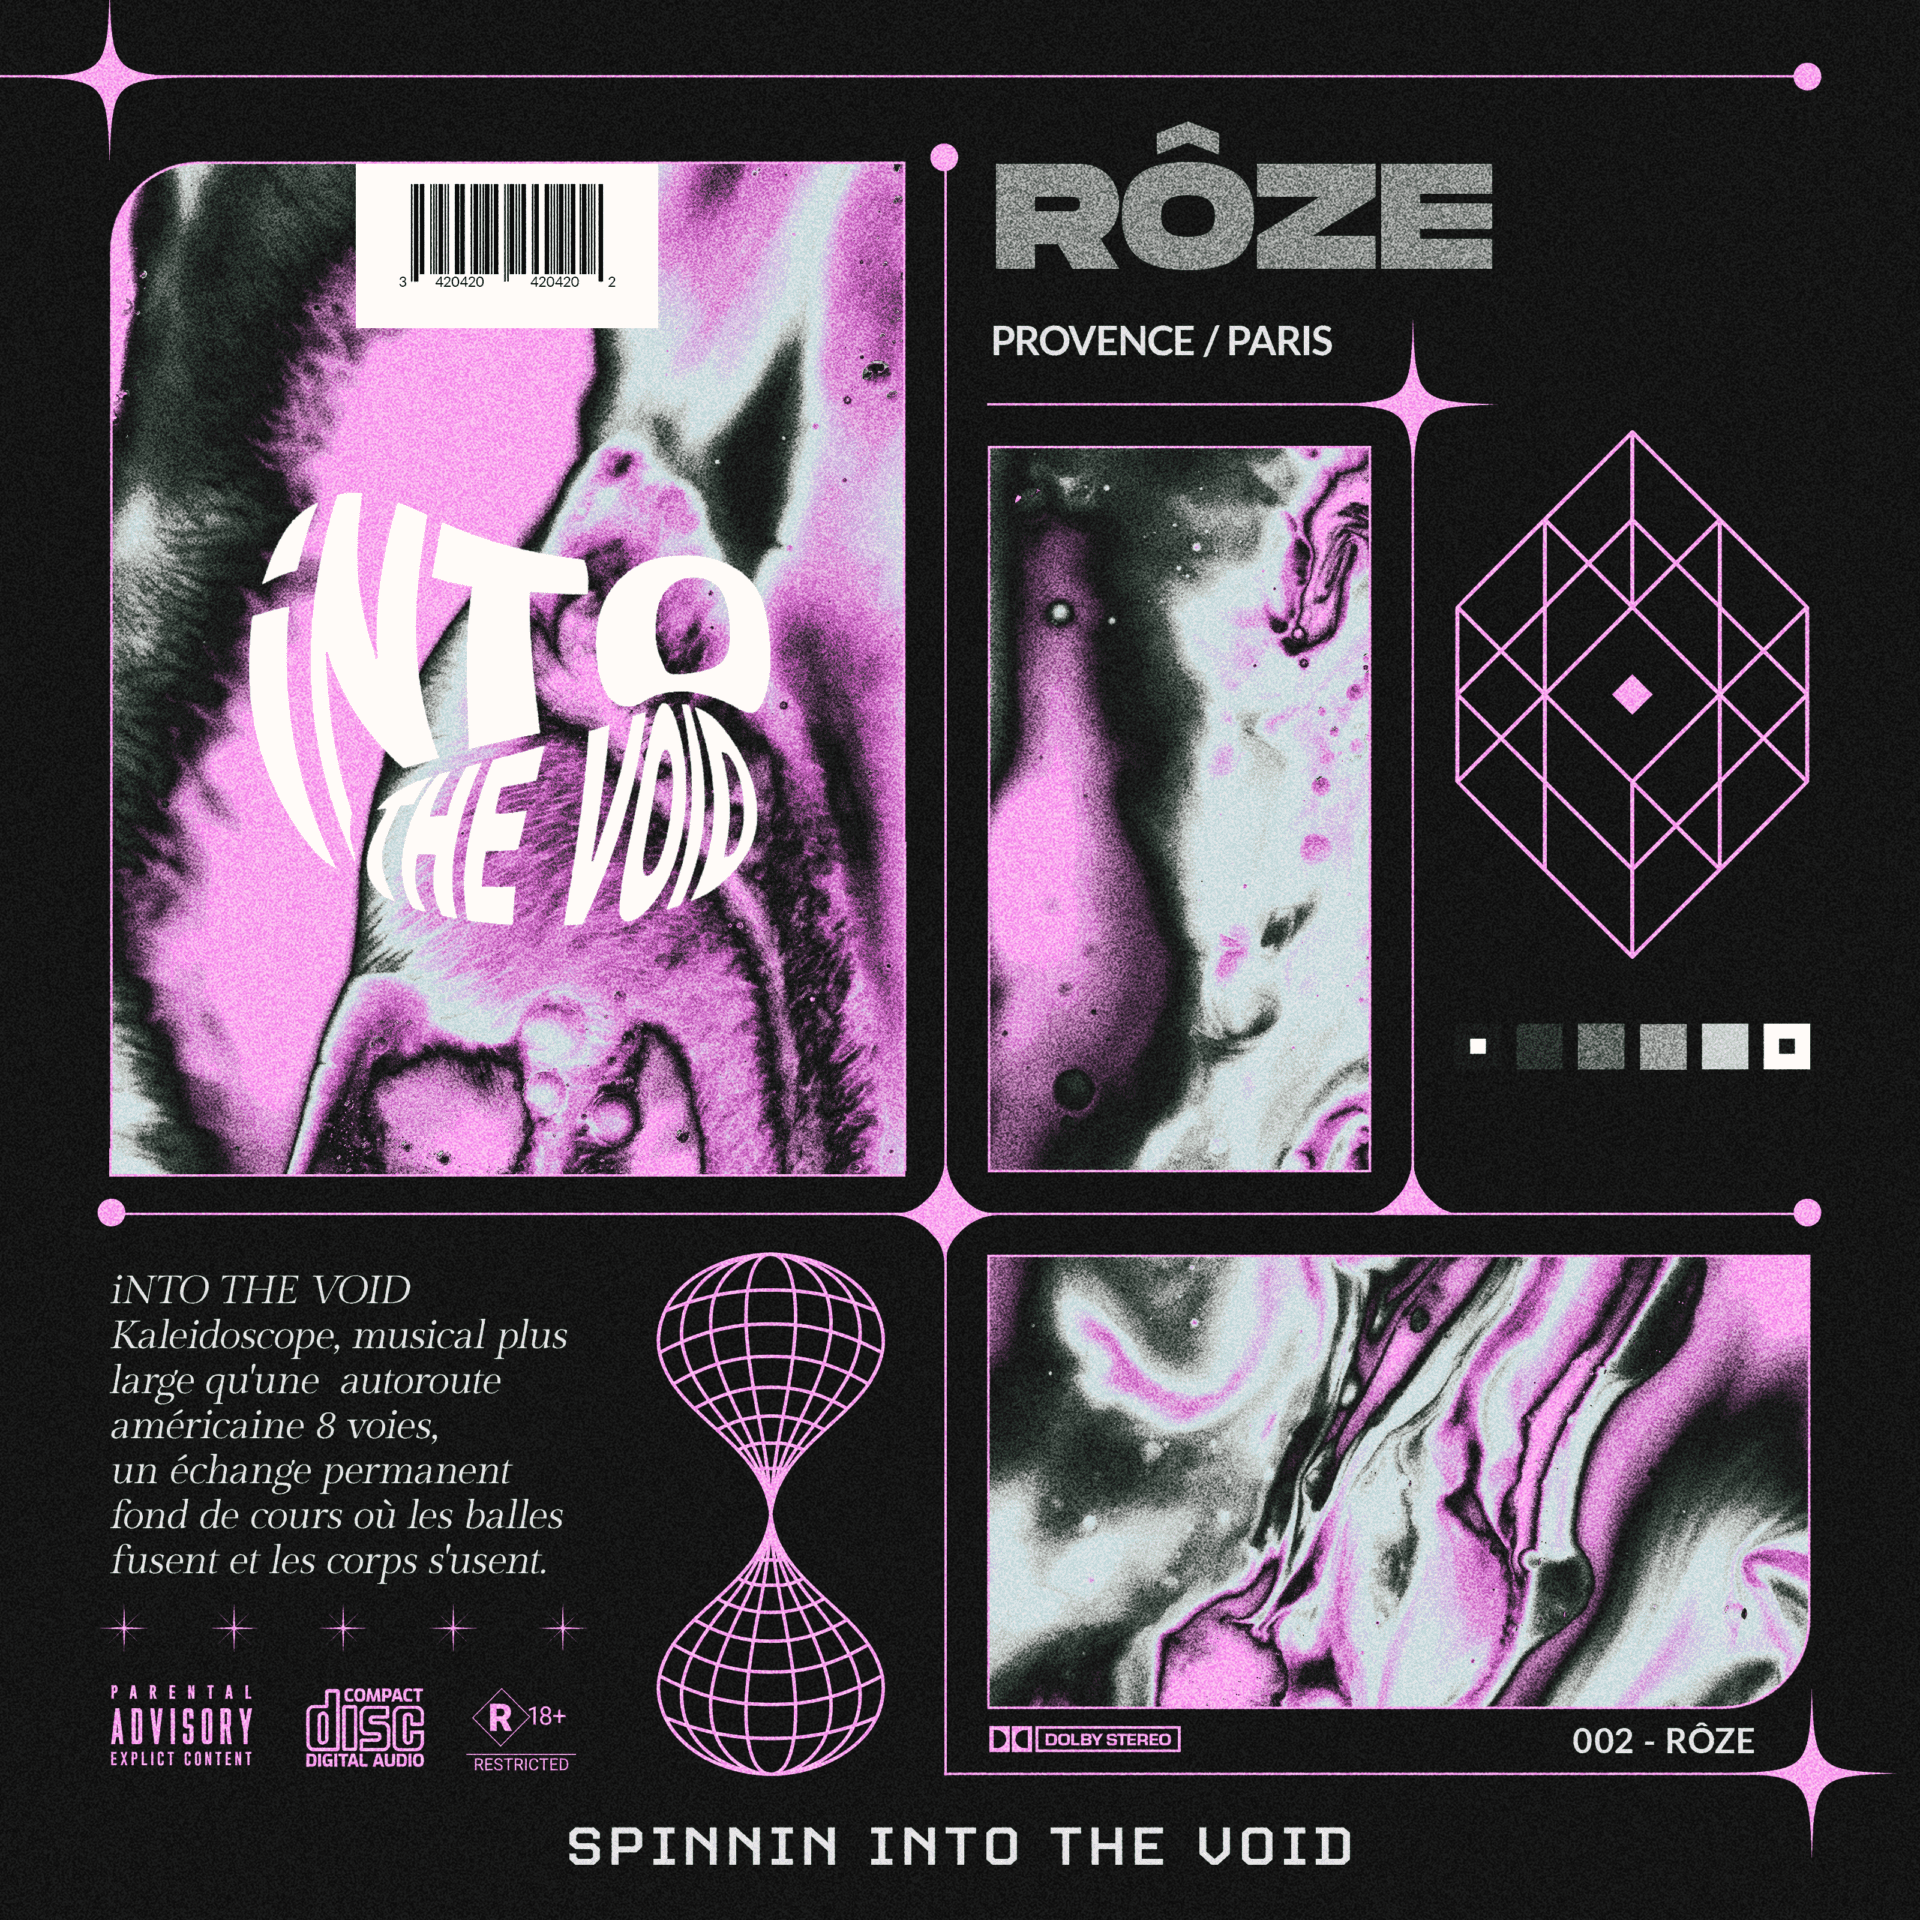 Cover spinnin into the void 002 Roze